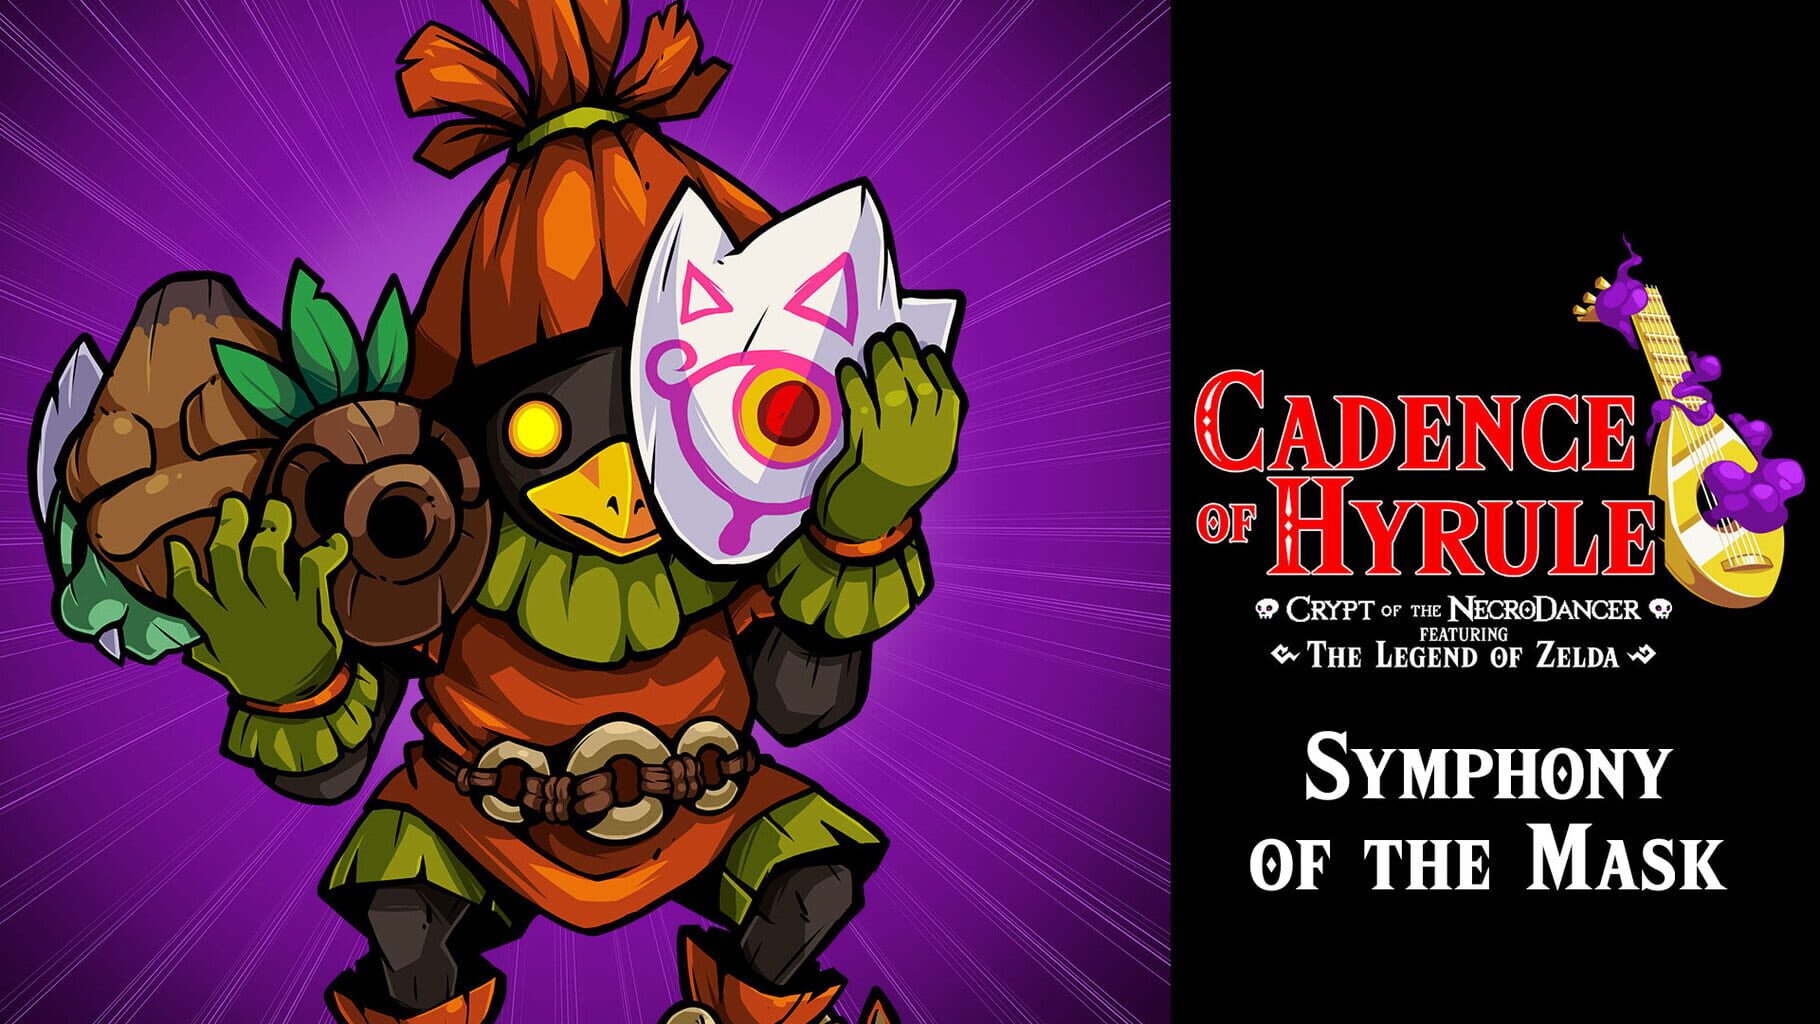 Cadence of Hyrule: Crypt of the NecroDancer Featuring the Legend of Zelda - Symphony of the Mask artwork